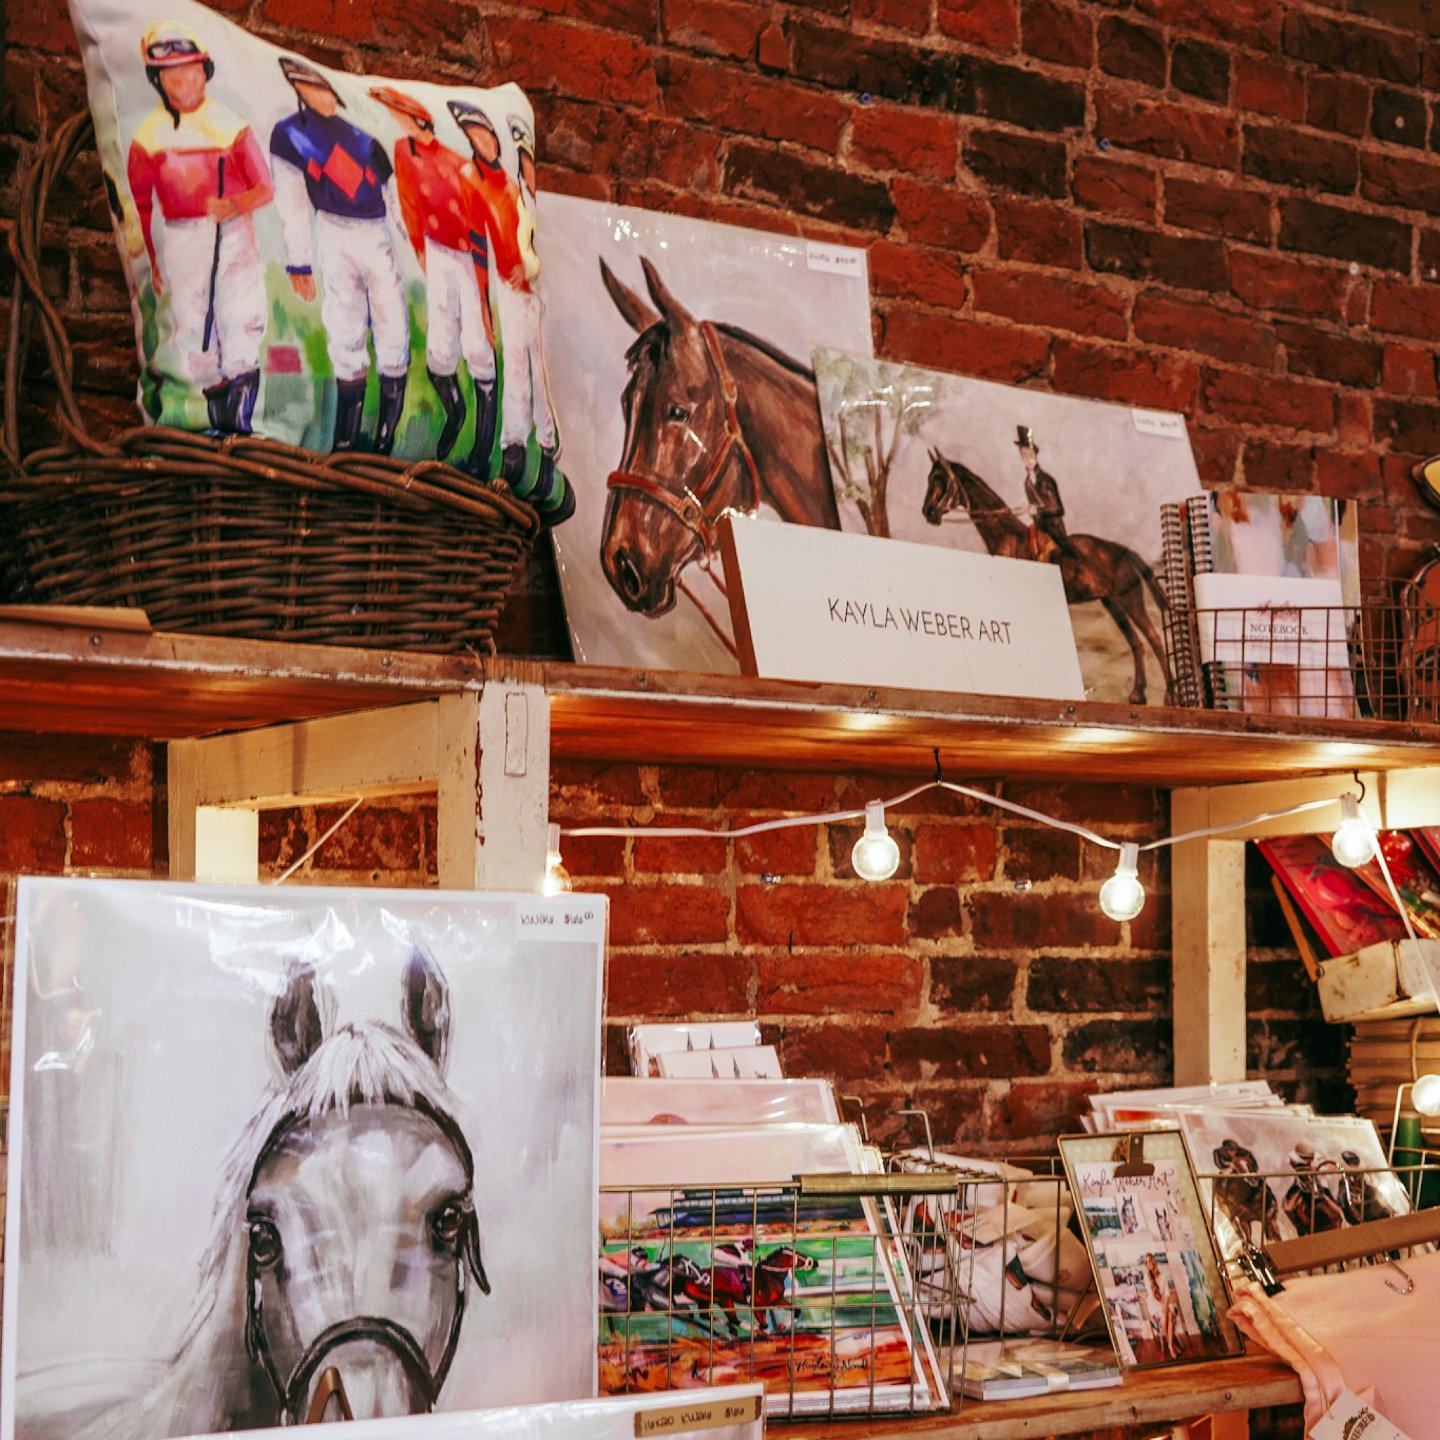 Ready to jockey for the best view of @kaylaweberart's stunning art? 🐎🎨 Just one day until the Derby, and we're all about those mane attractions! So be sure to come by and grab your favorites to add some equestrian elegance to your home for Derby da